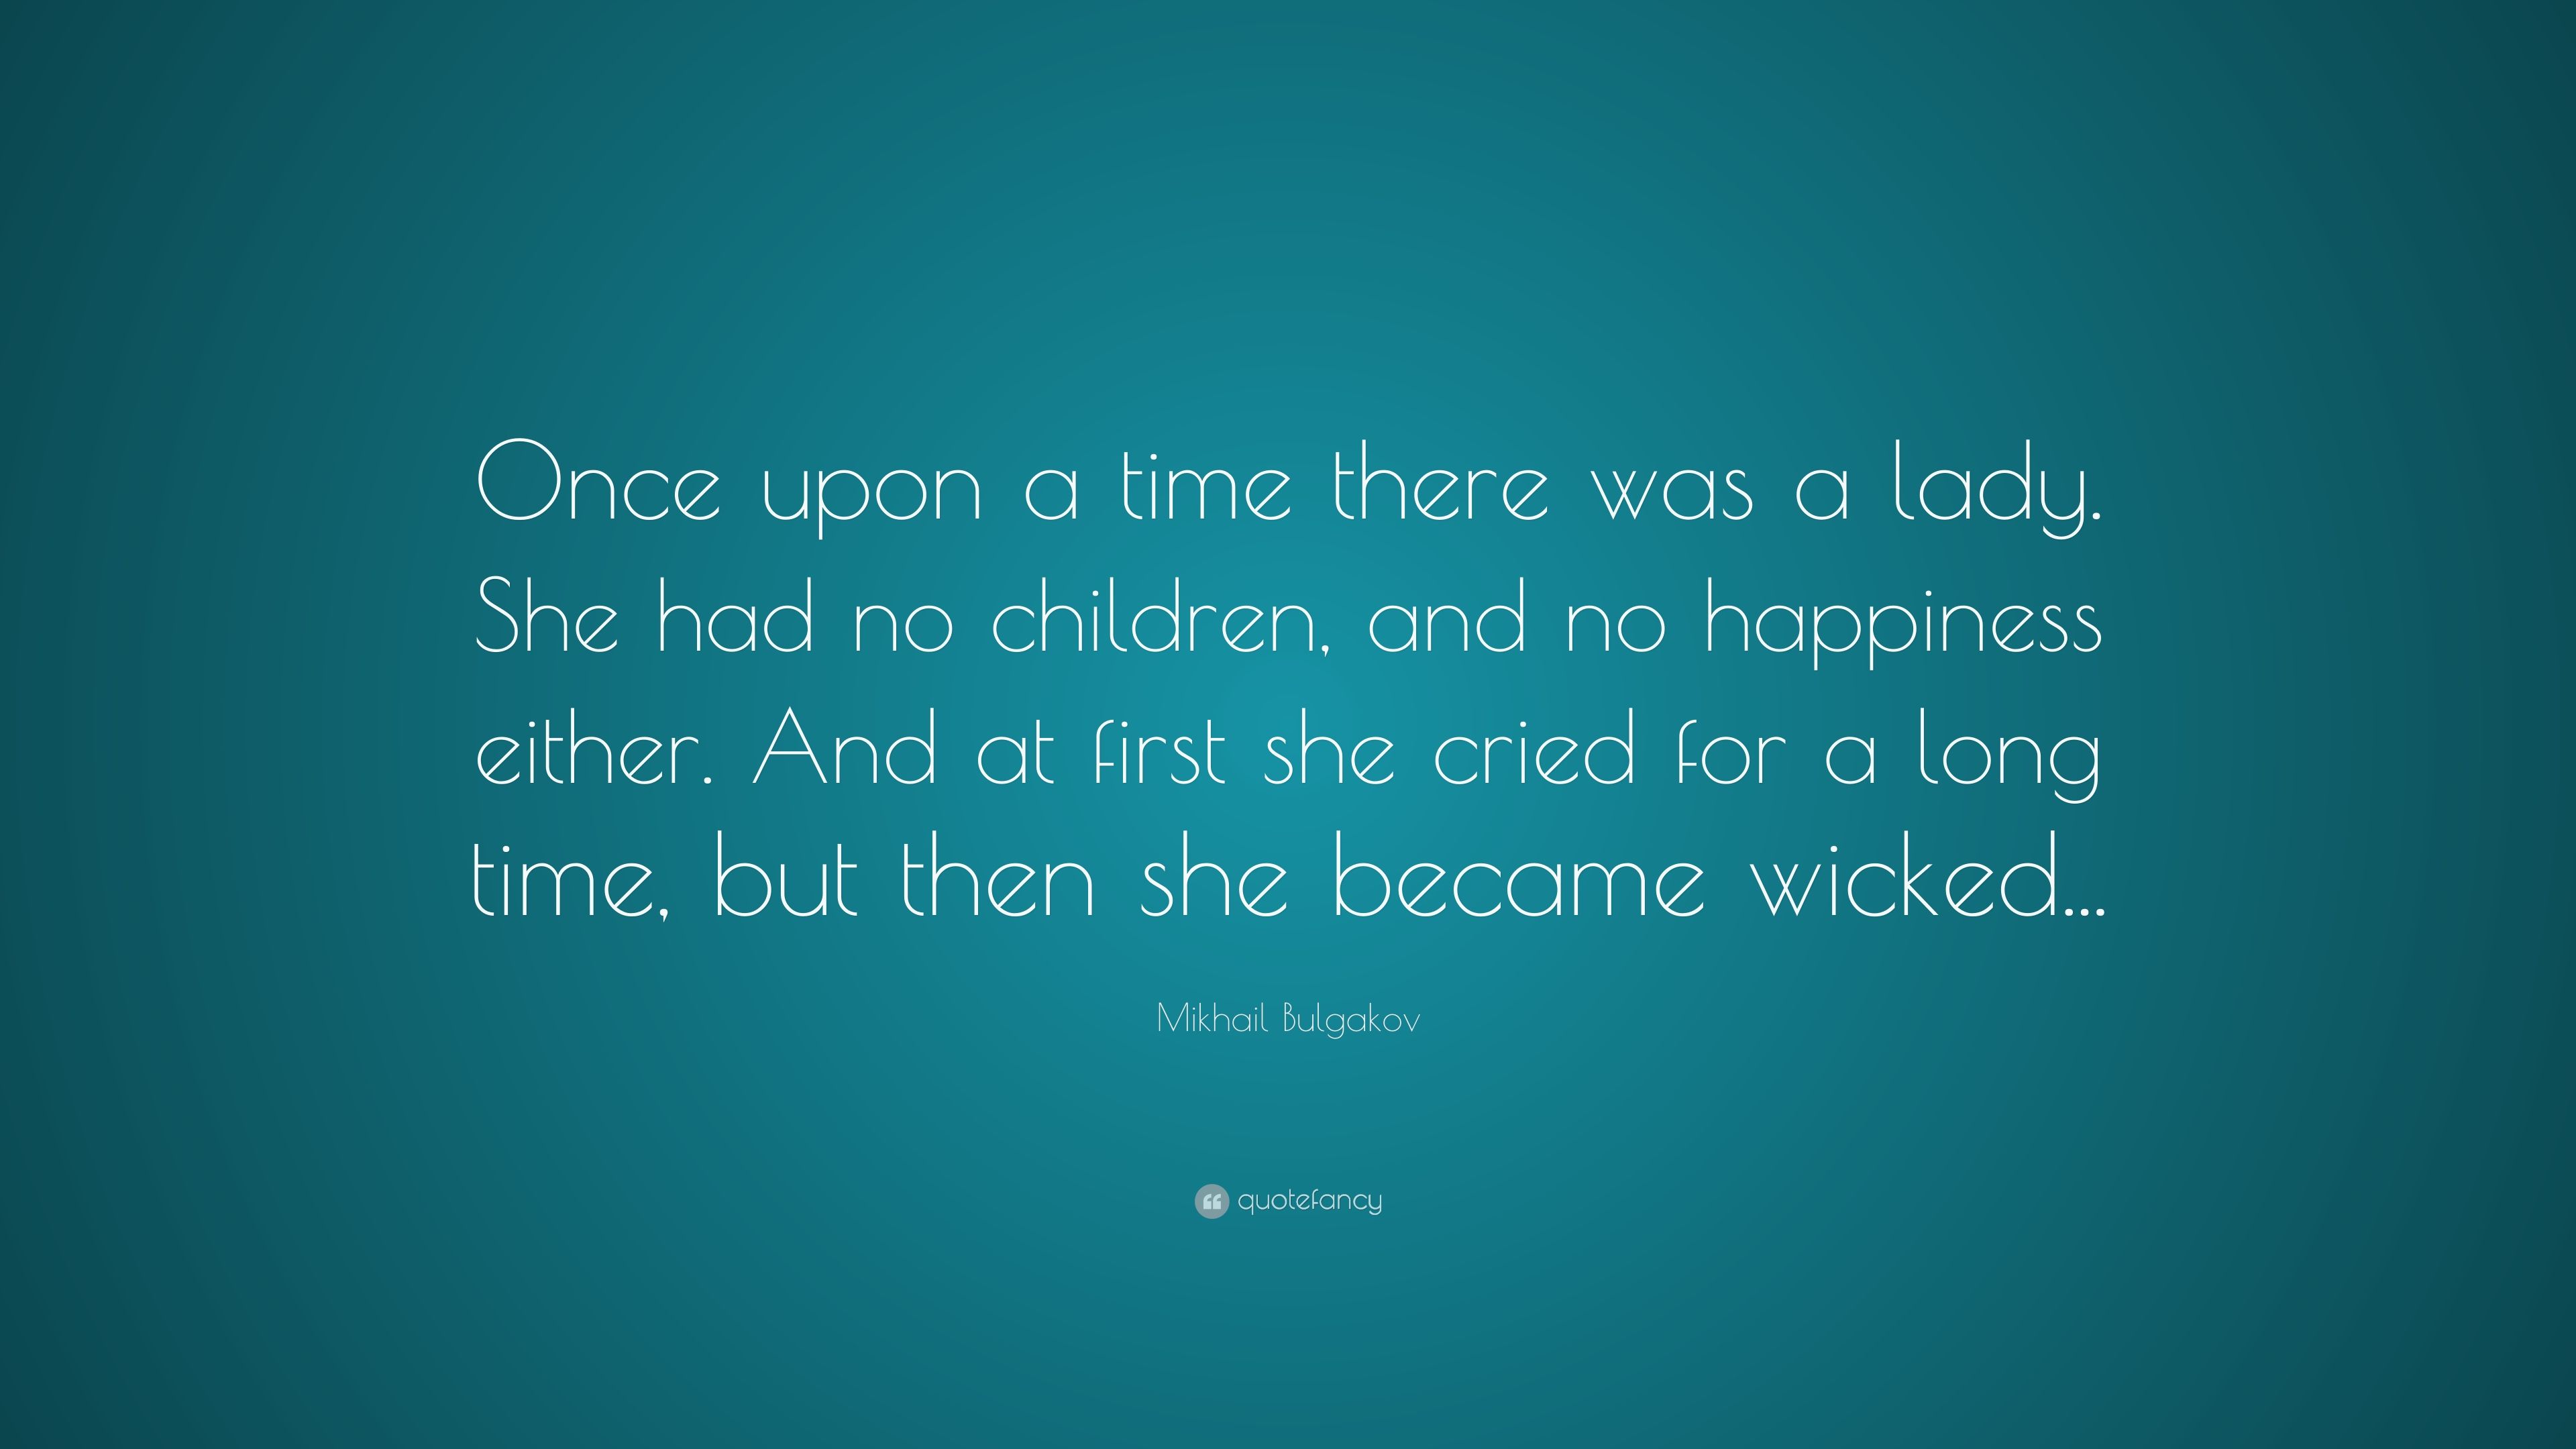 Mikhail Bulgakov Quote: “Once upon a time there was a lady. She had no children, and no happiness either. And at first she cried for a long time, .” (7 wallpaper)